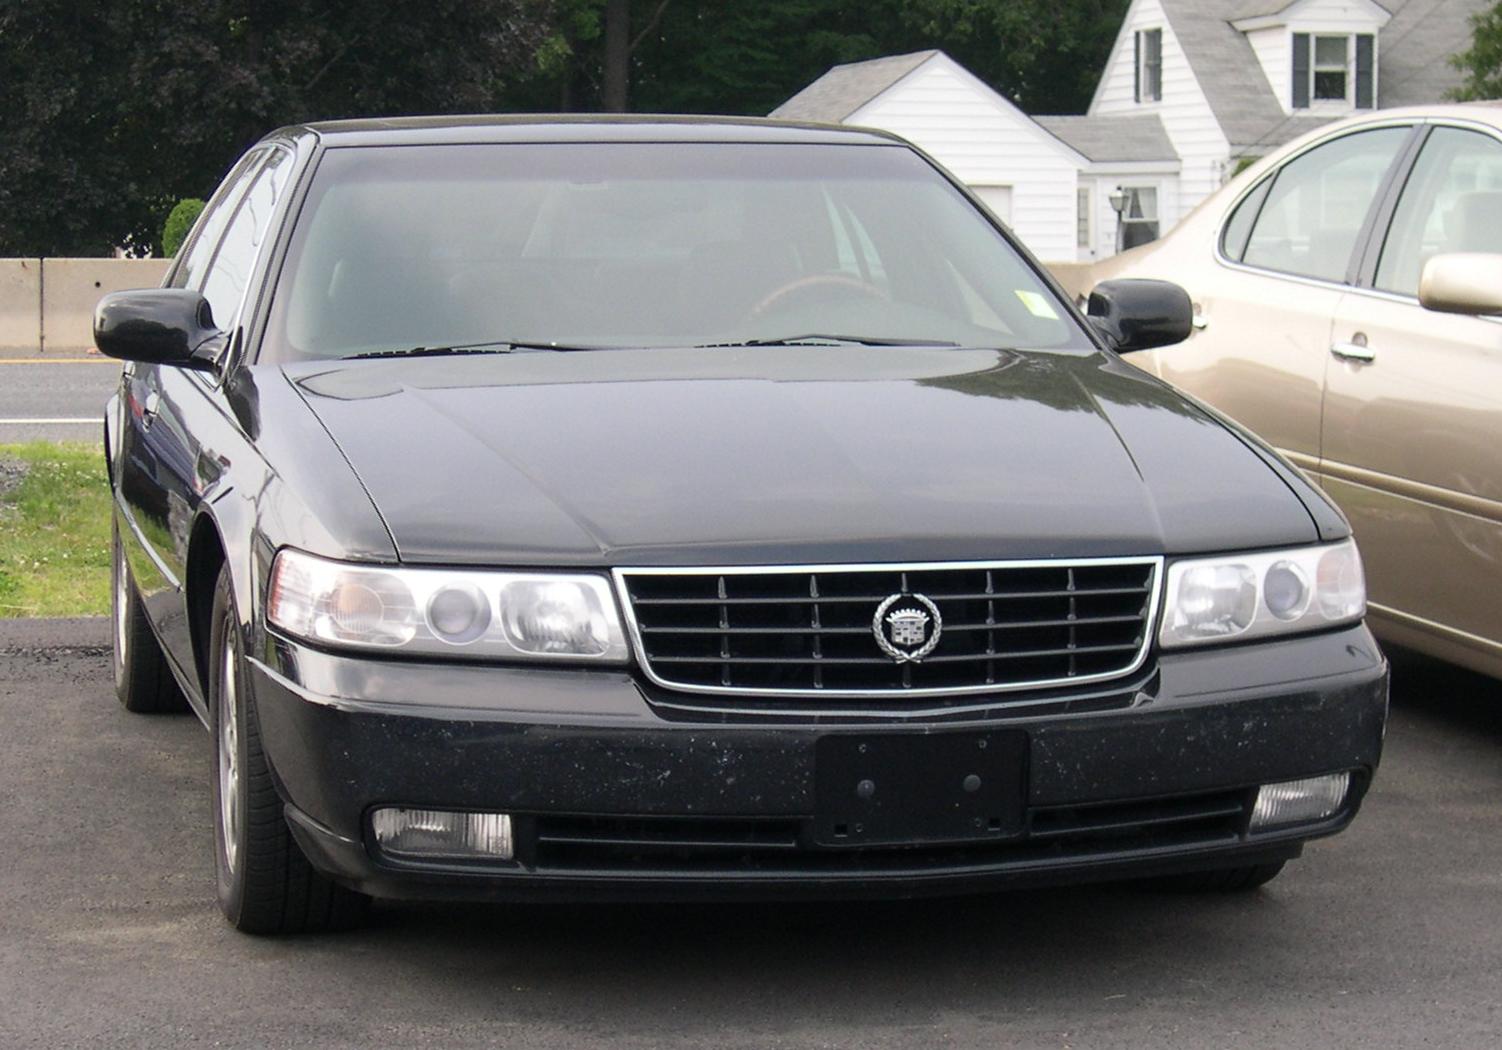 2000 cadillac seville sts review